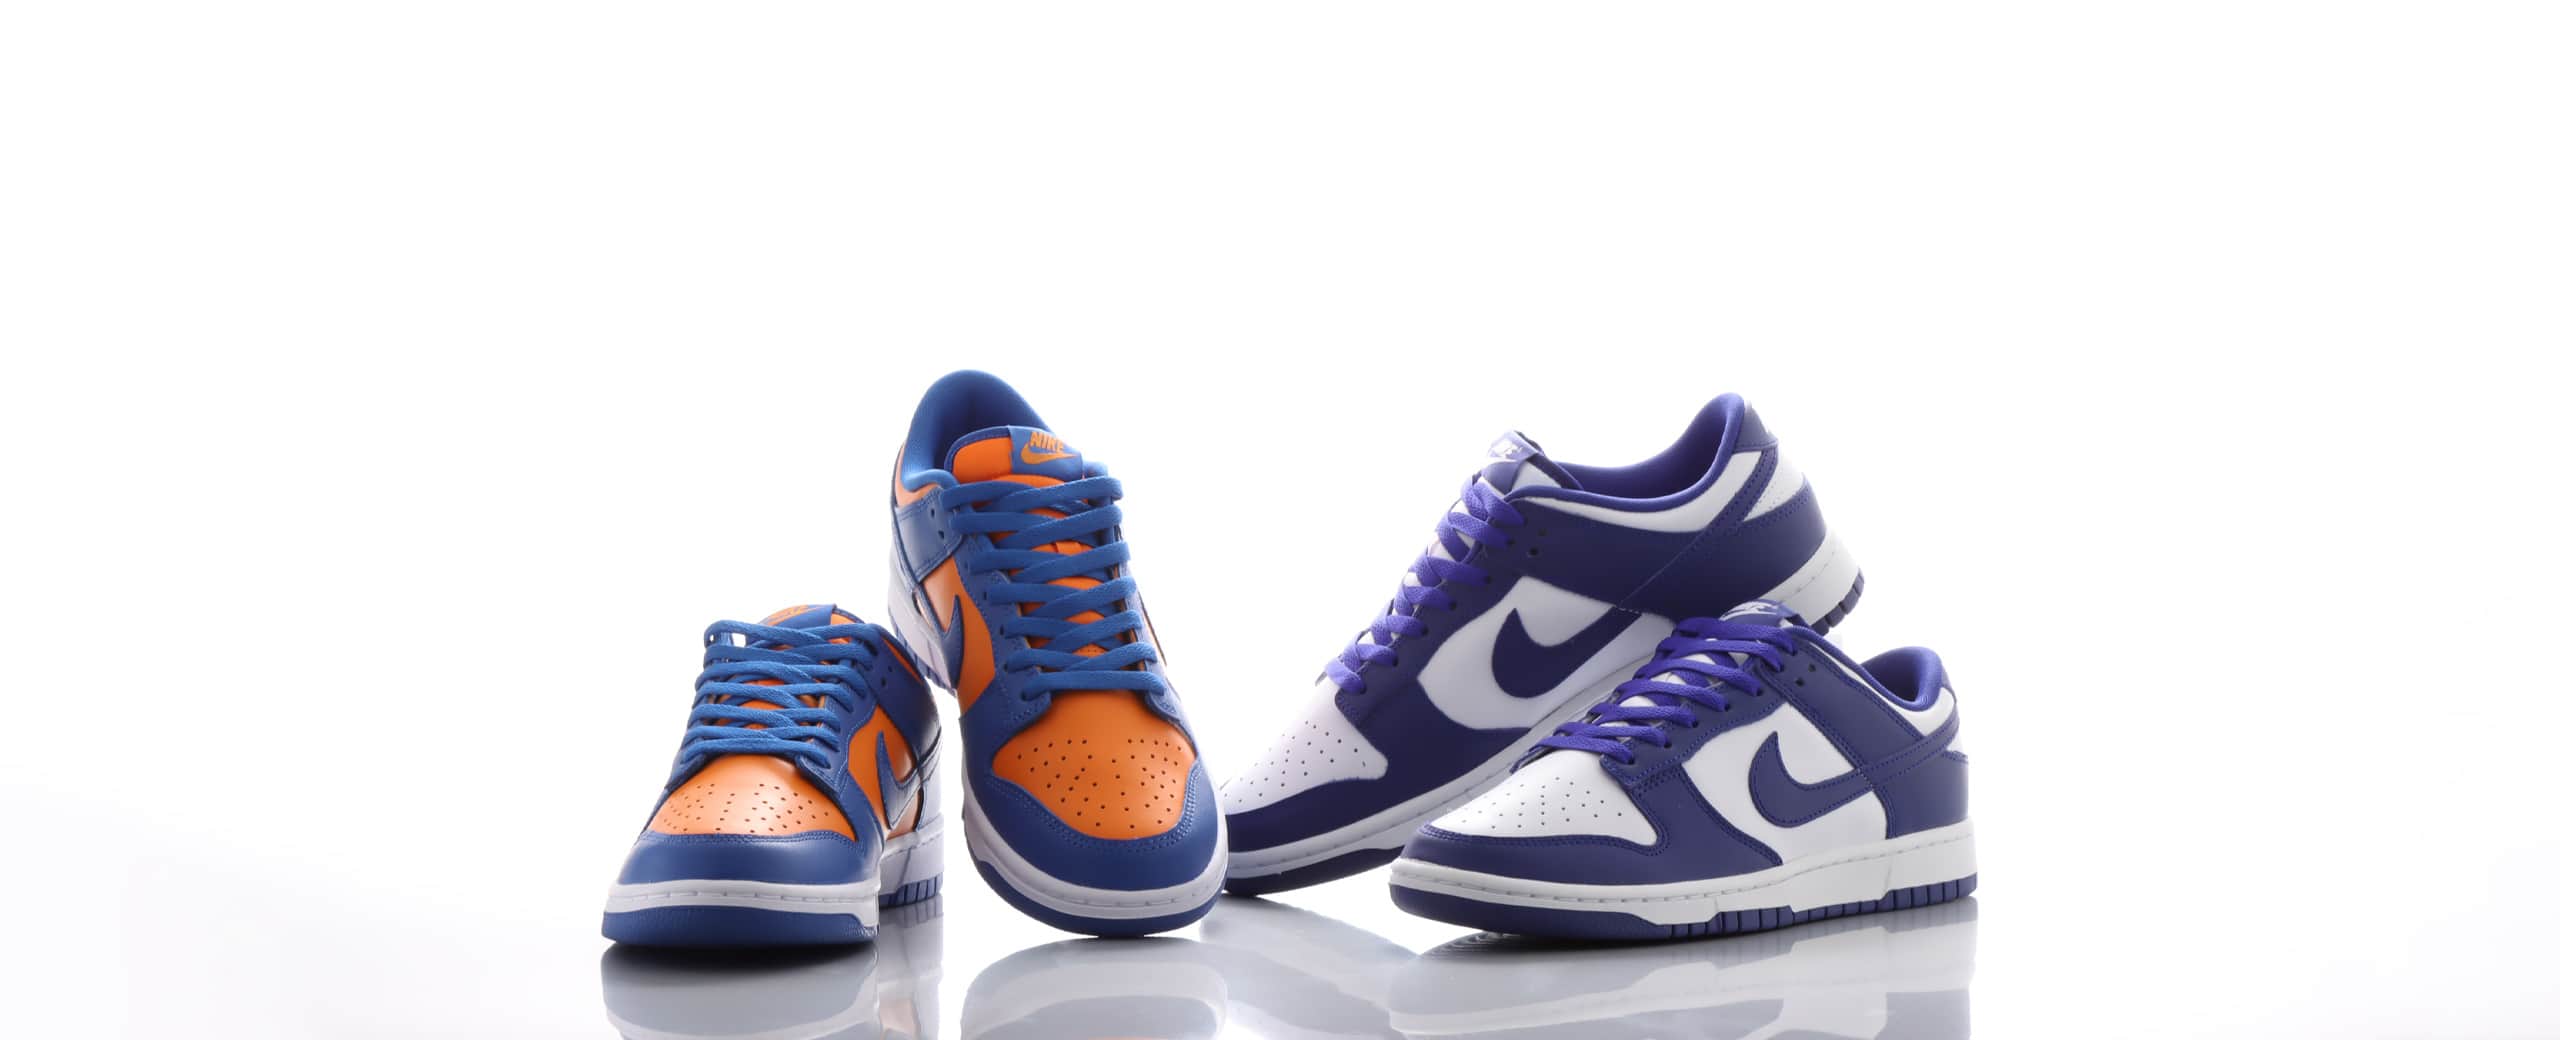 NIKE DUNK LOW RETRO BTTYS “Concord”